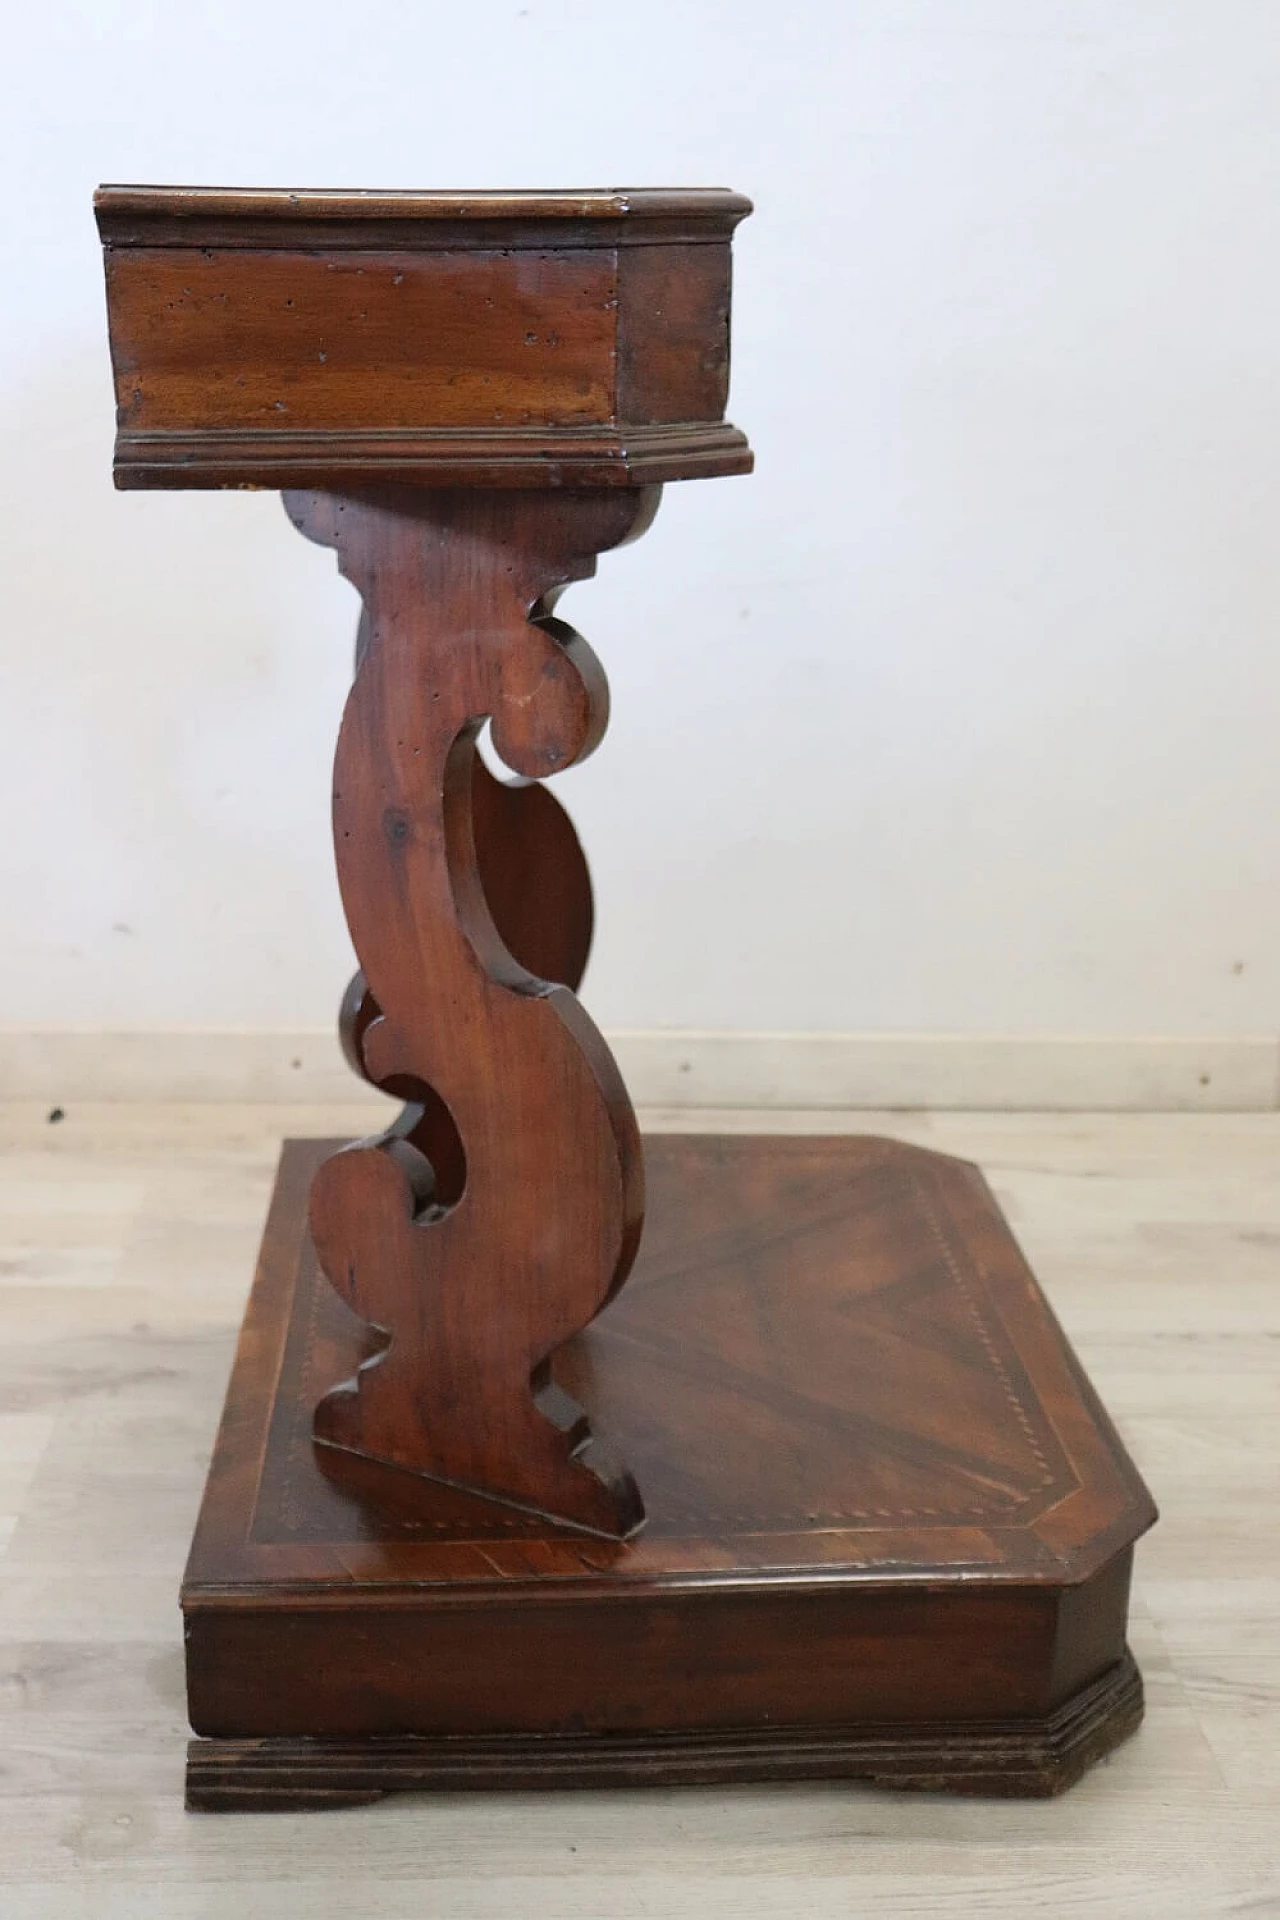 Kneeling-stool in walnut with inlays, late 18th century 7